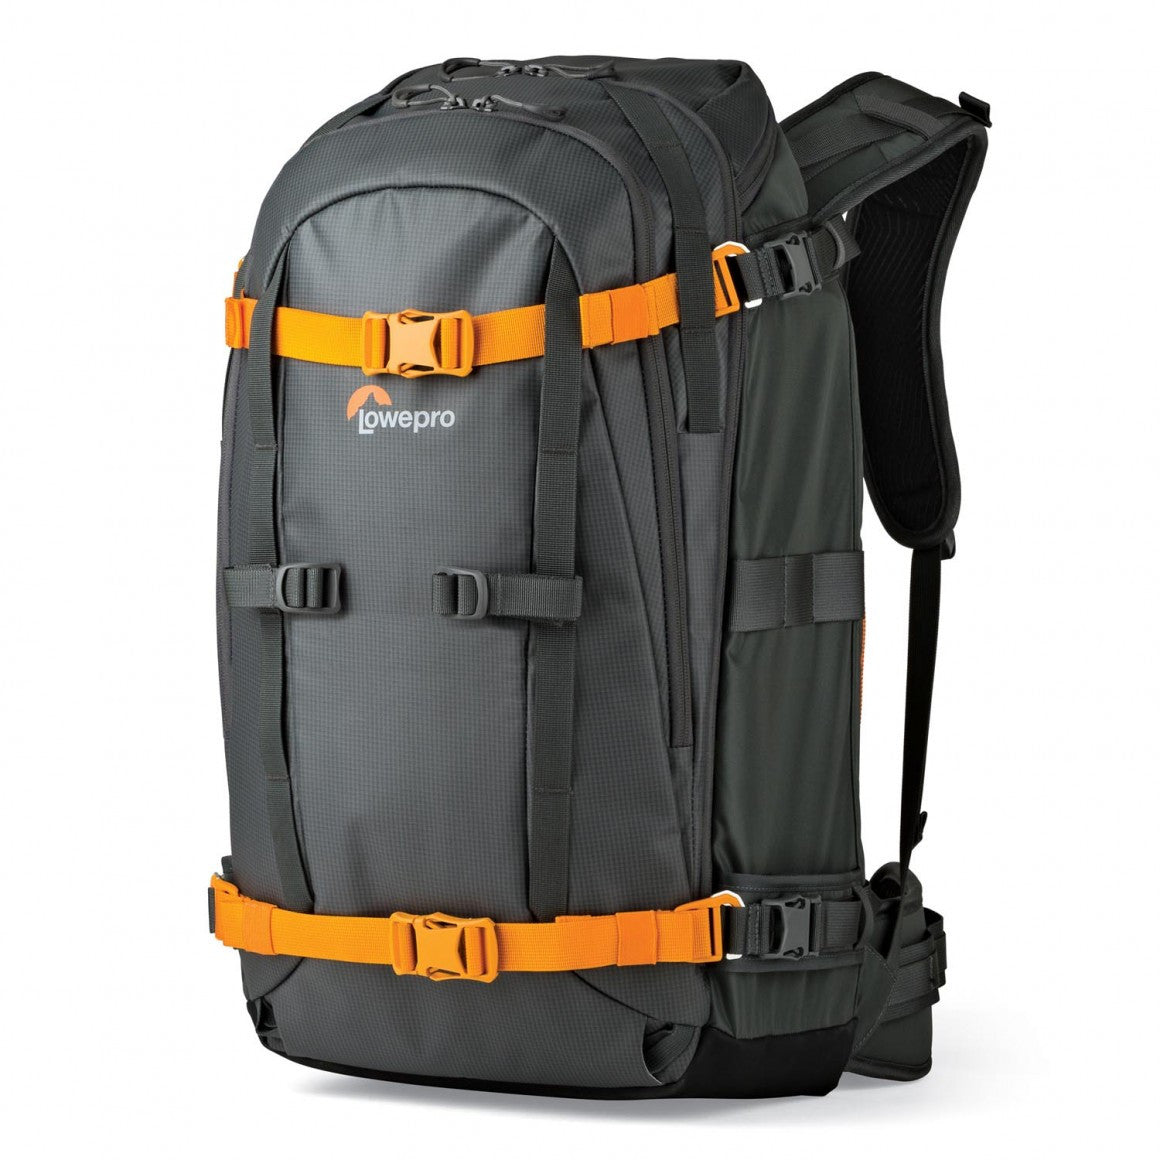 Lowepro Whistler 450AW Backpack (Grey), bags backpacks, Lowepro - Pictureline  - 2